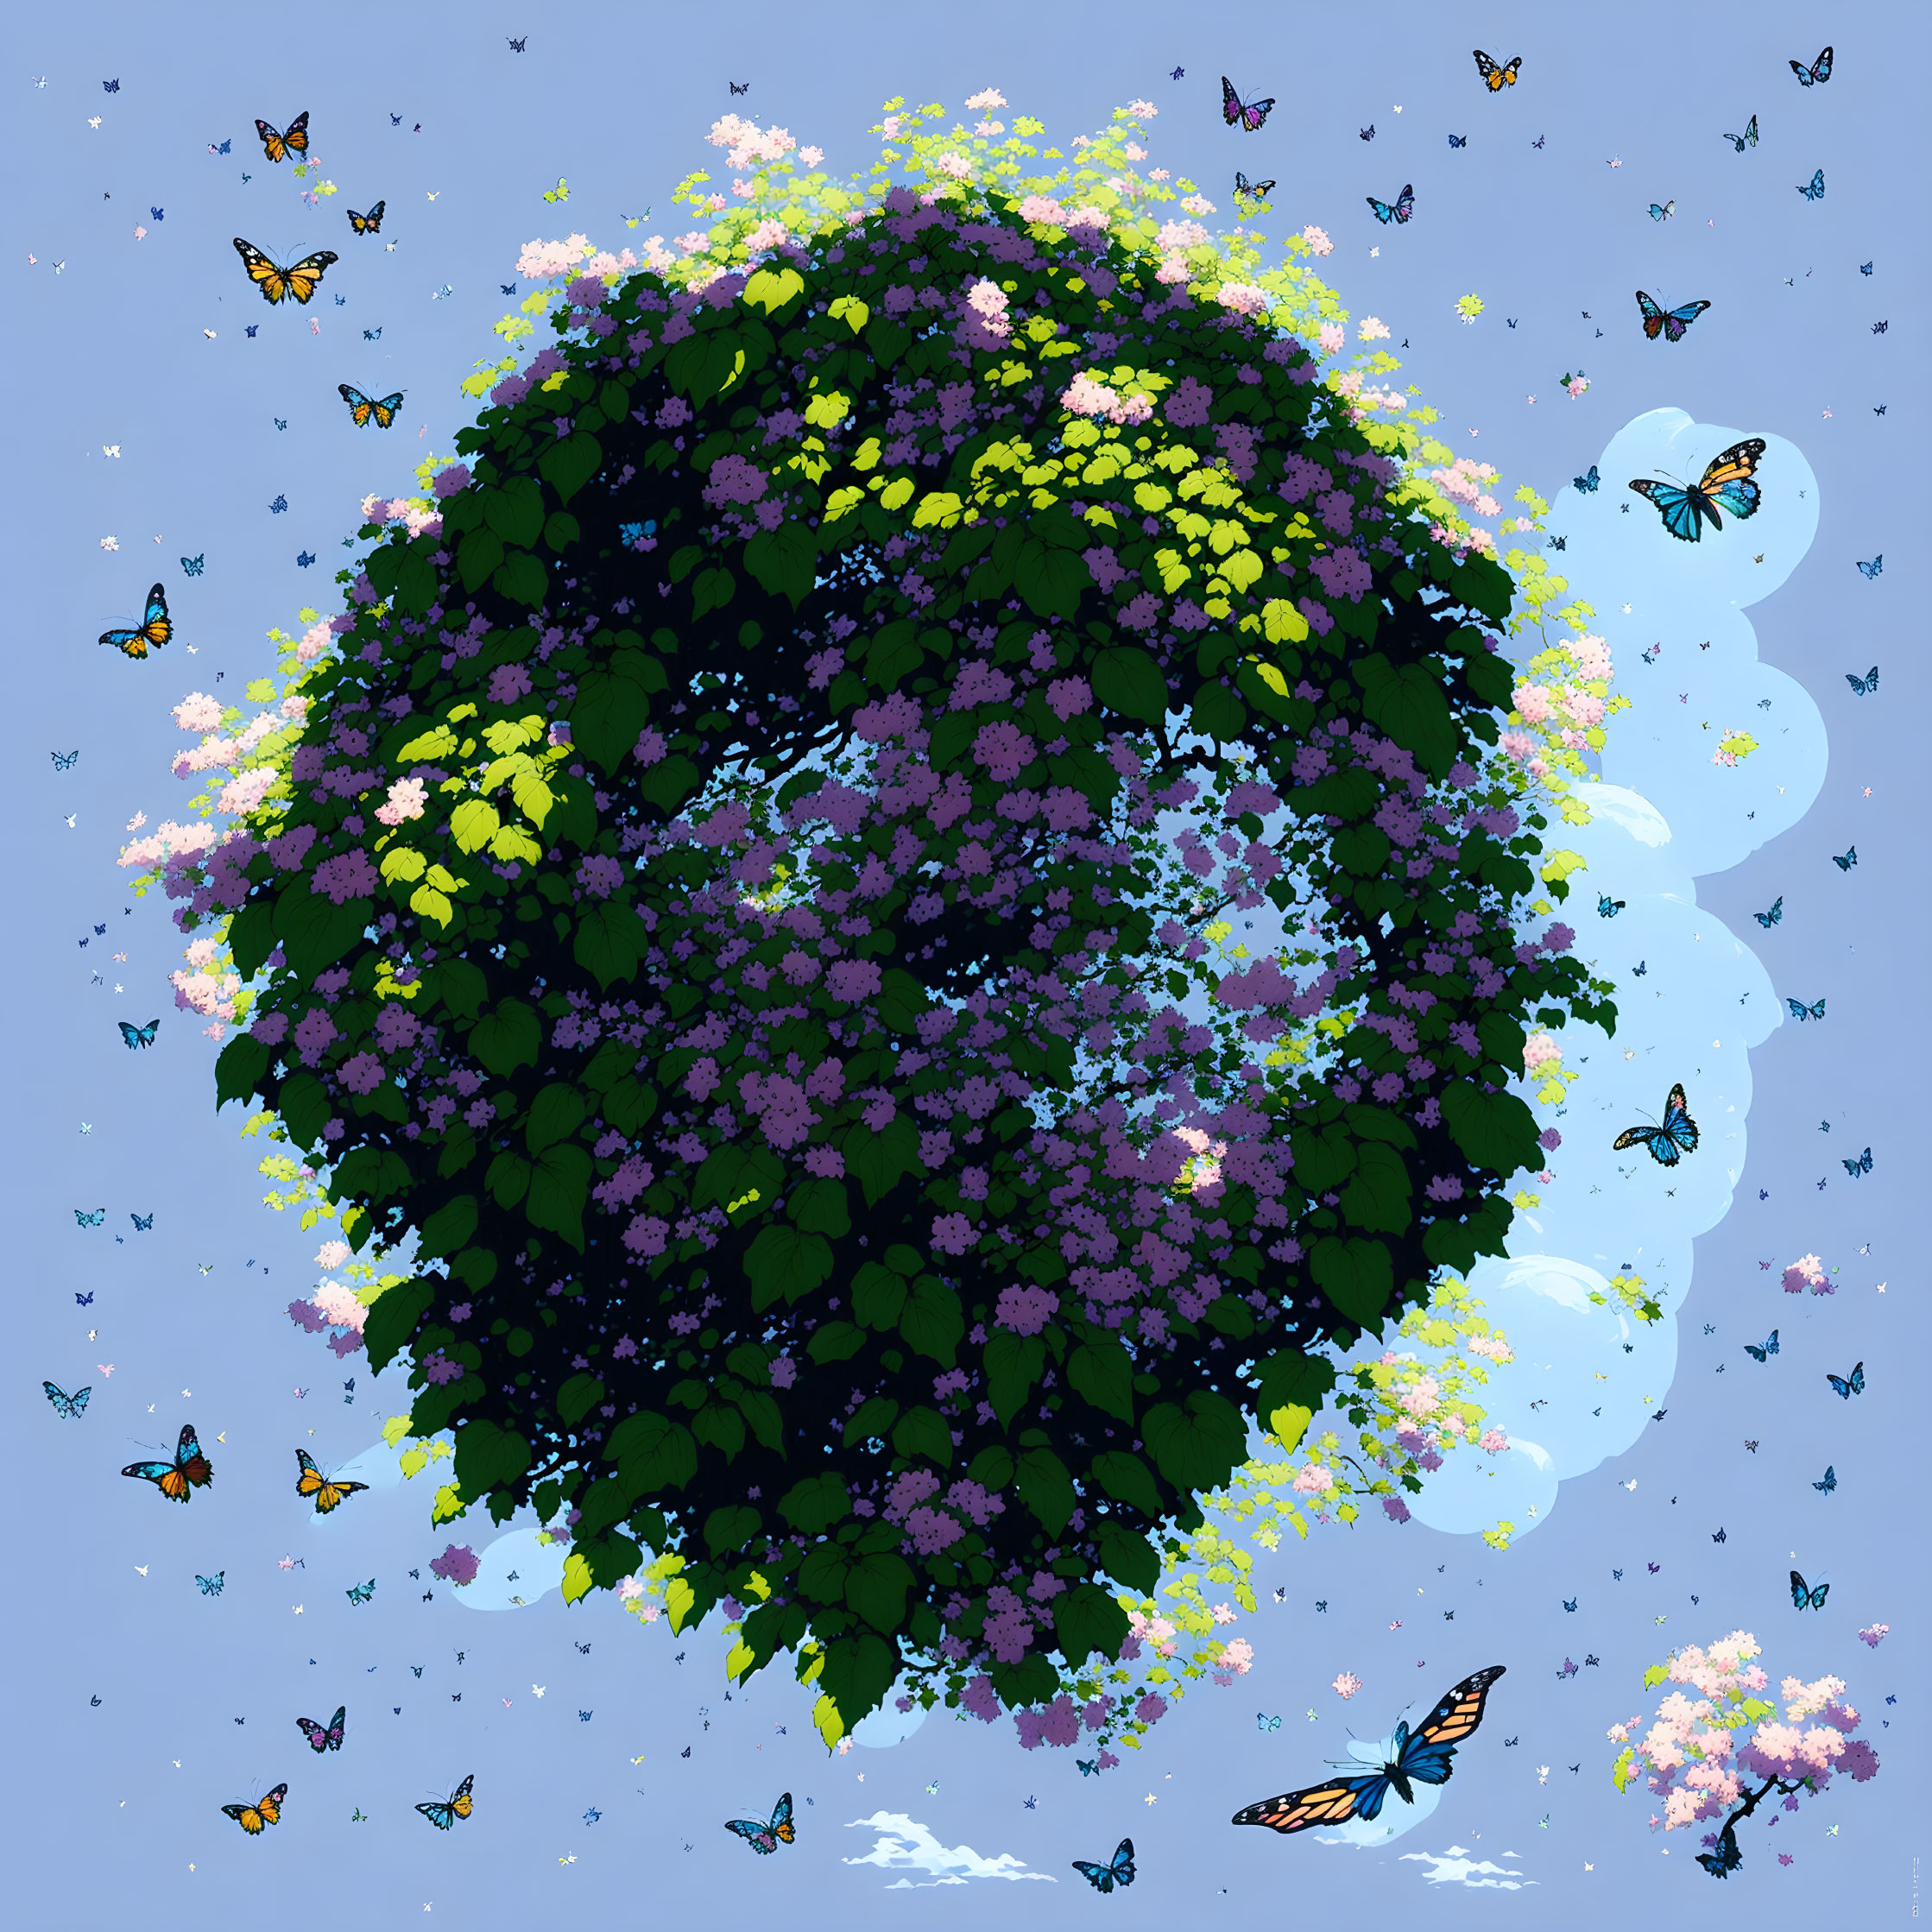 A small planet of blossoms and butterfly's 